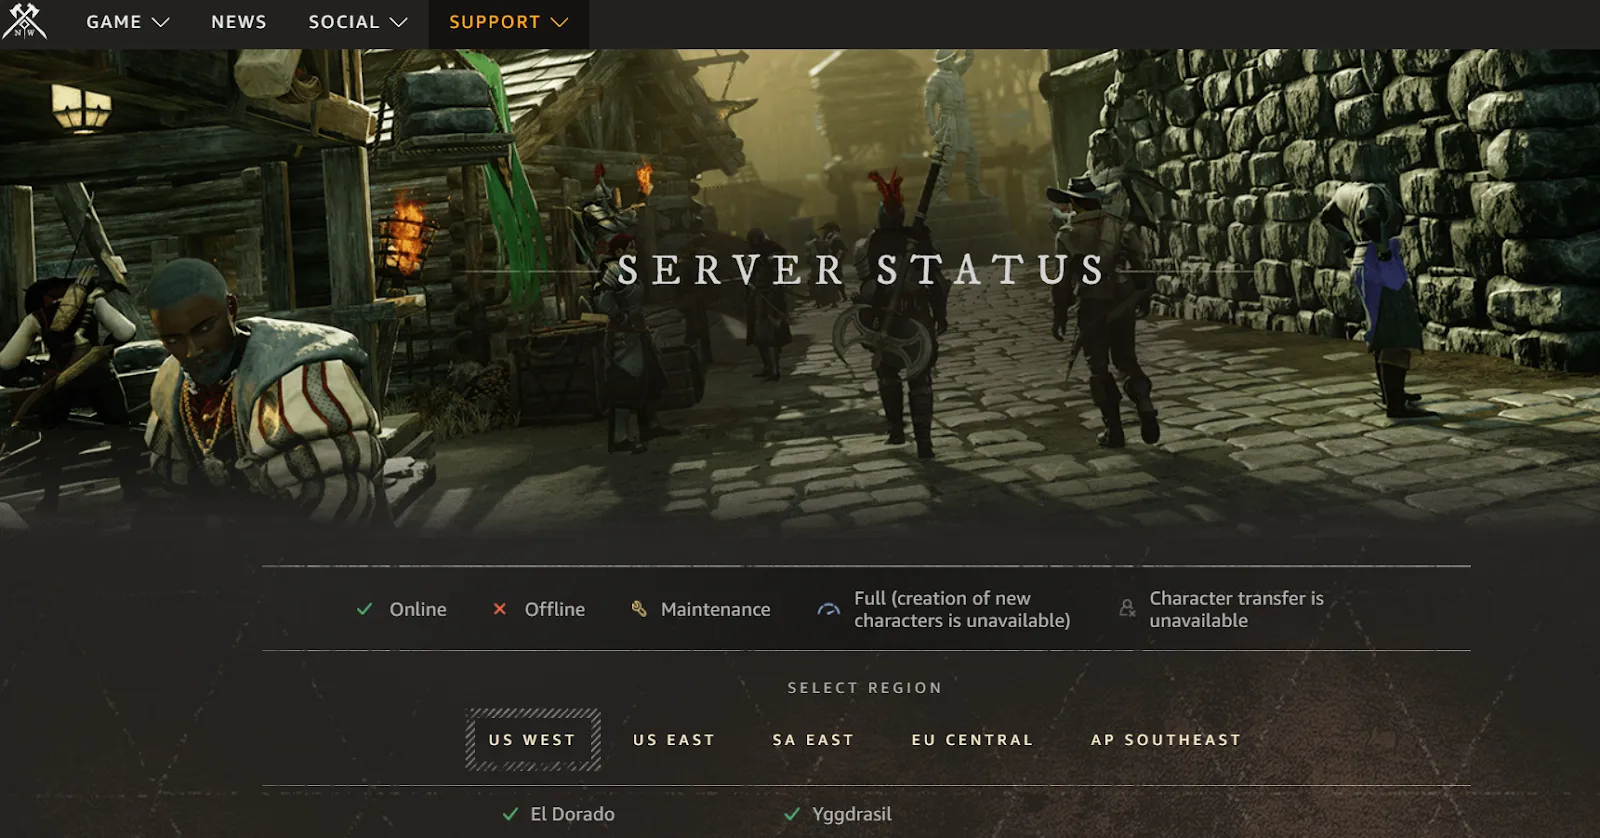 How to check server status for New World